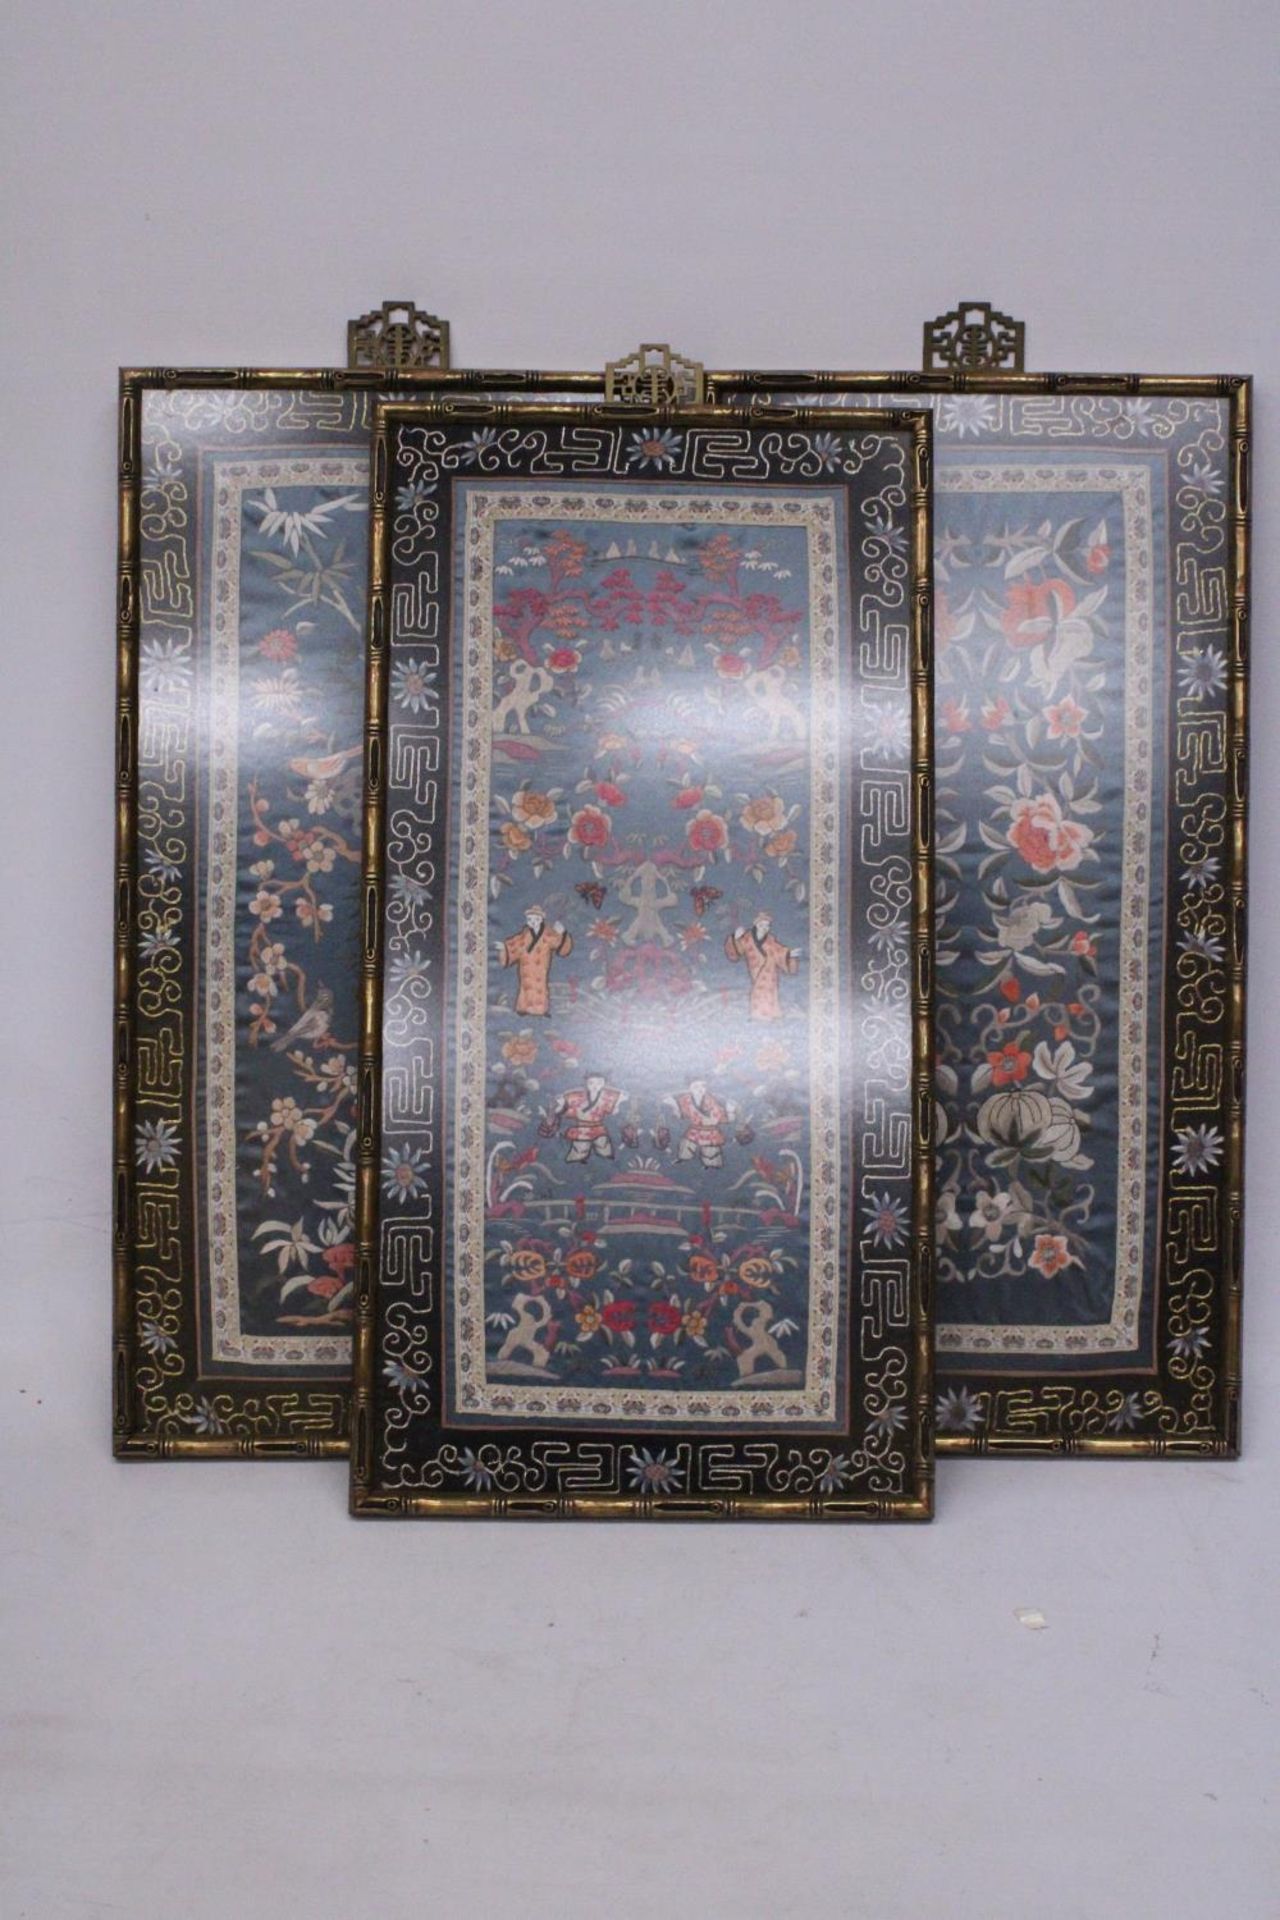 THREE CHINESE SILK EMBROIDERIES DEPICTING A LANDSCAPE SCENE, BIRDS AND FLORALS IN BAMBOO FRAMES